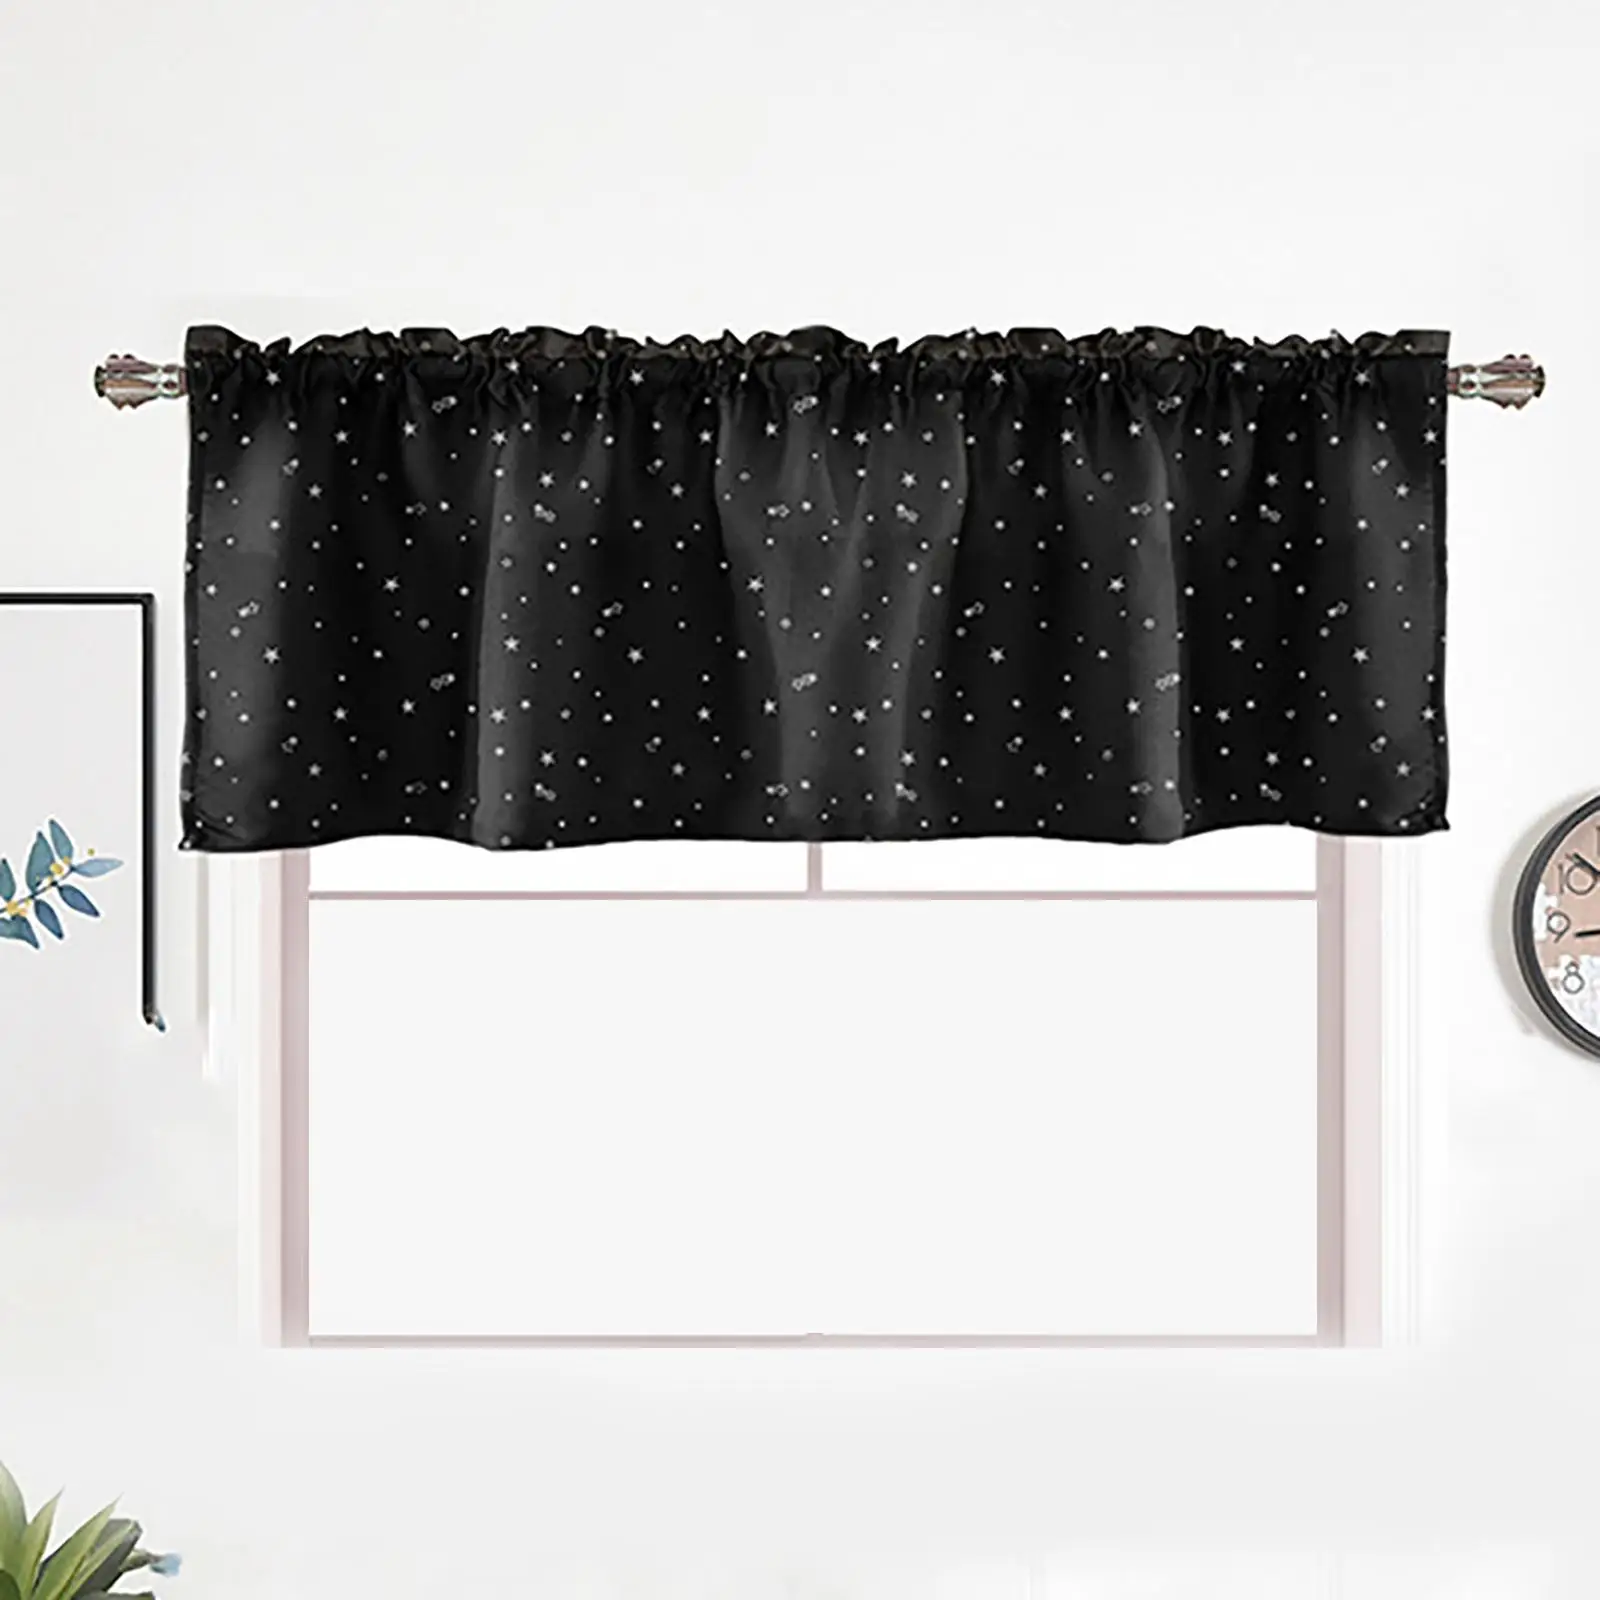 1 Panel Blackout Curtain Decor Cut Out Easy Care Machine Washable Rod Pocket Curtains Window Curtains Drapes for Bedroom Study